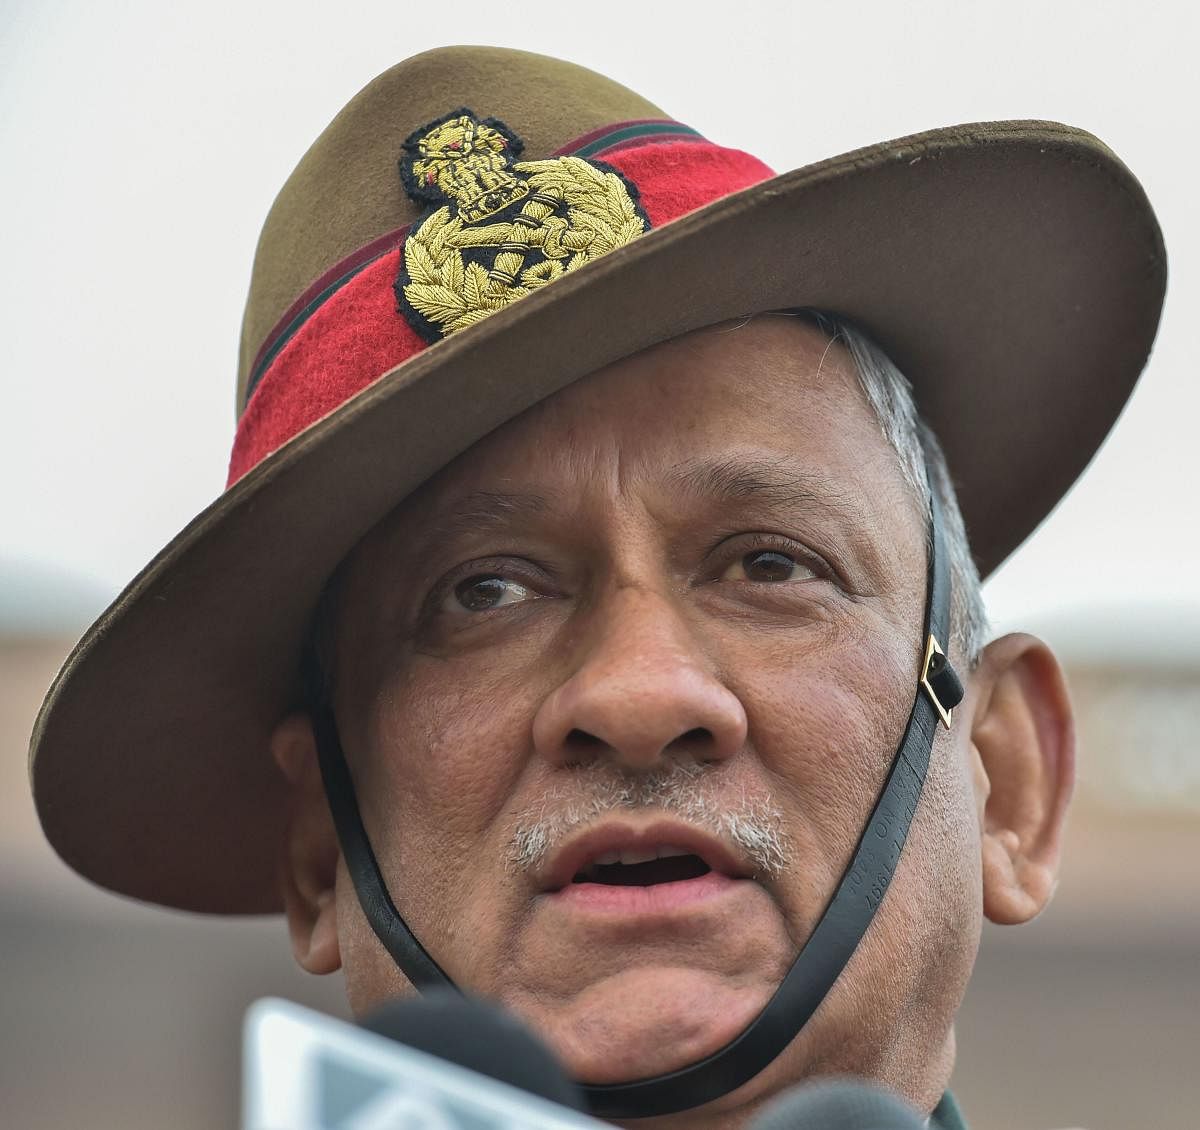 India's first Chief of Defence Staff(CDS) Gen Bipin Rawat addresses media personnel after inspecting the Guard of Honour at South Block lawns in New Delhi, Tuesday, Dec. 31, 2019. (PTI Photo)